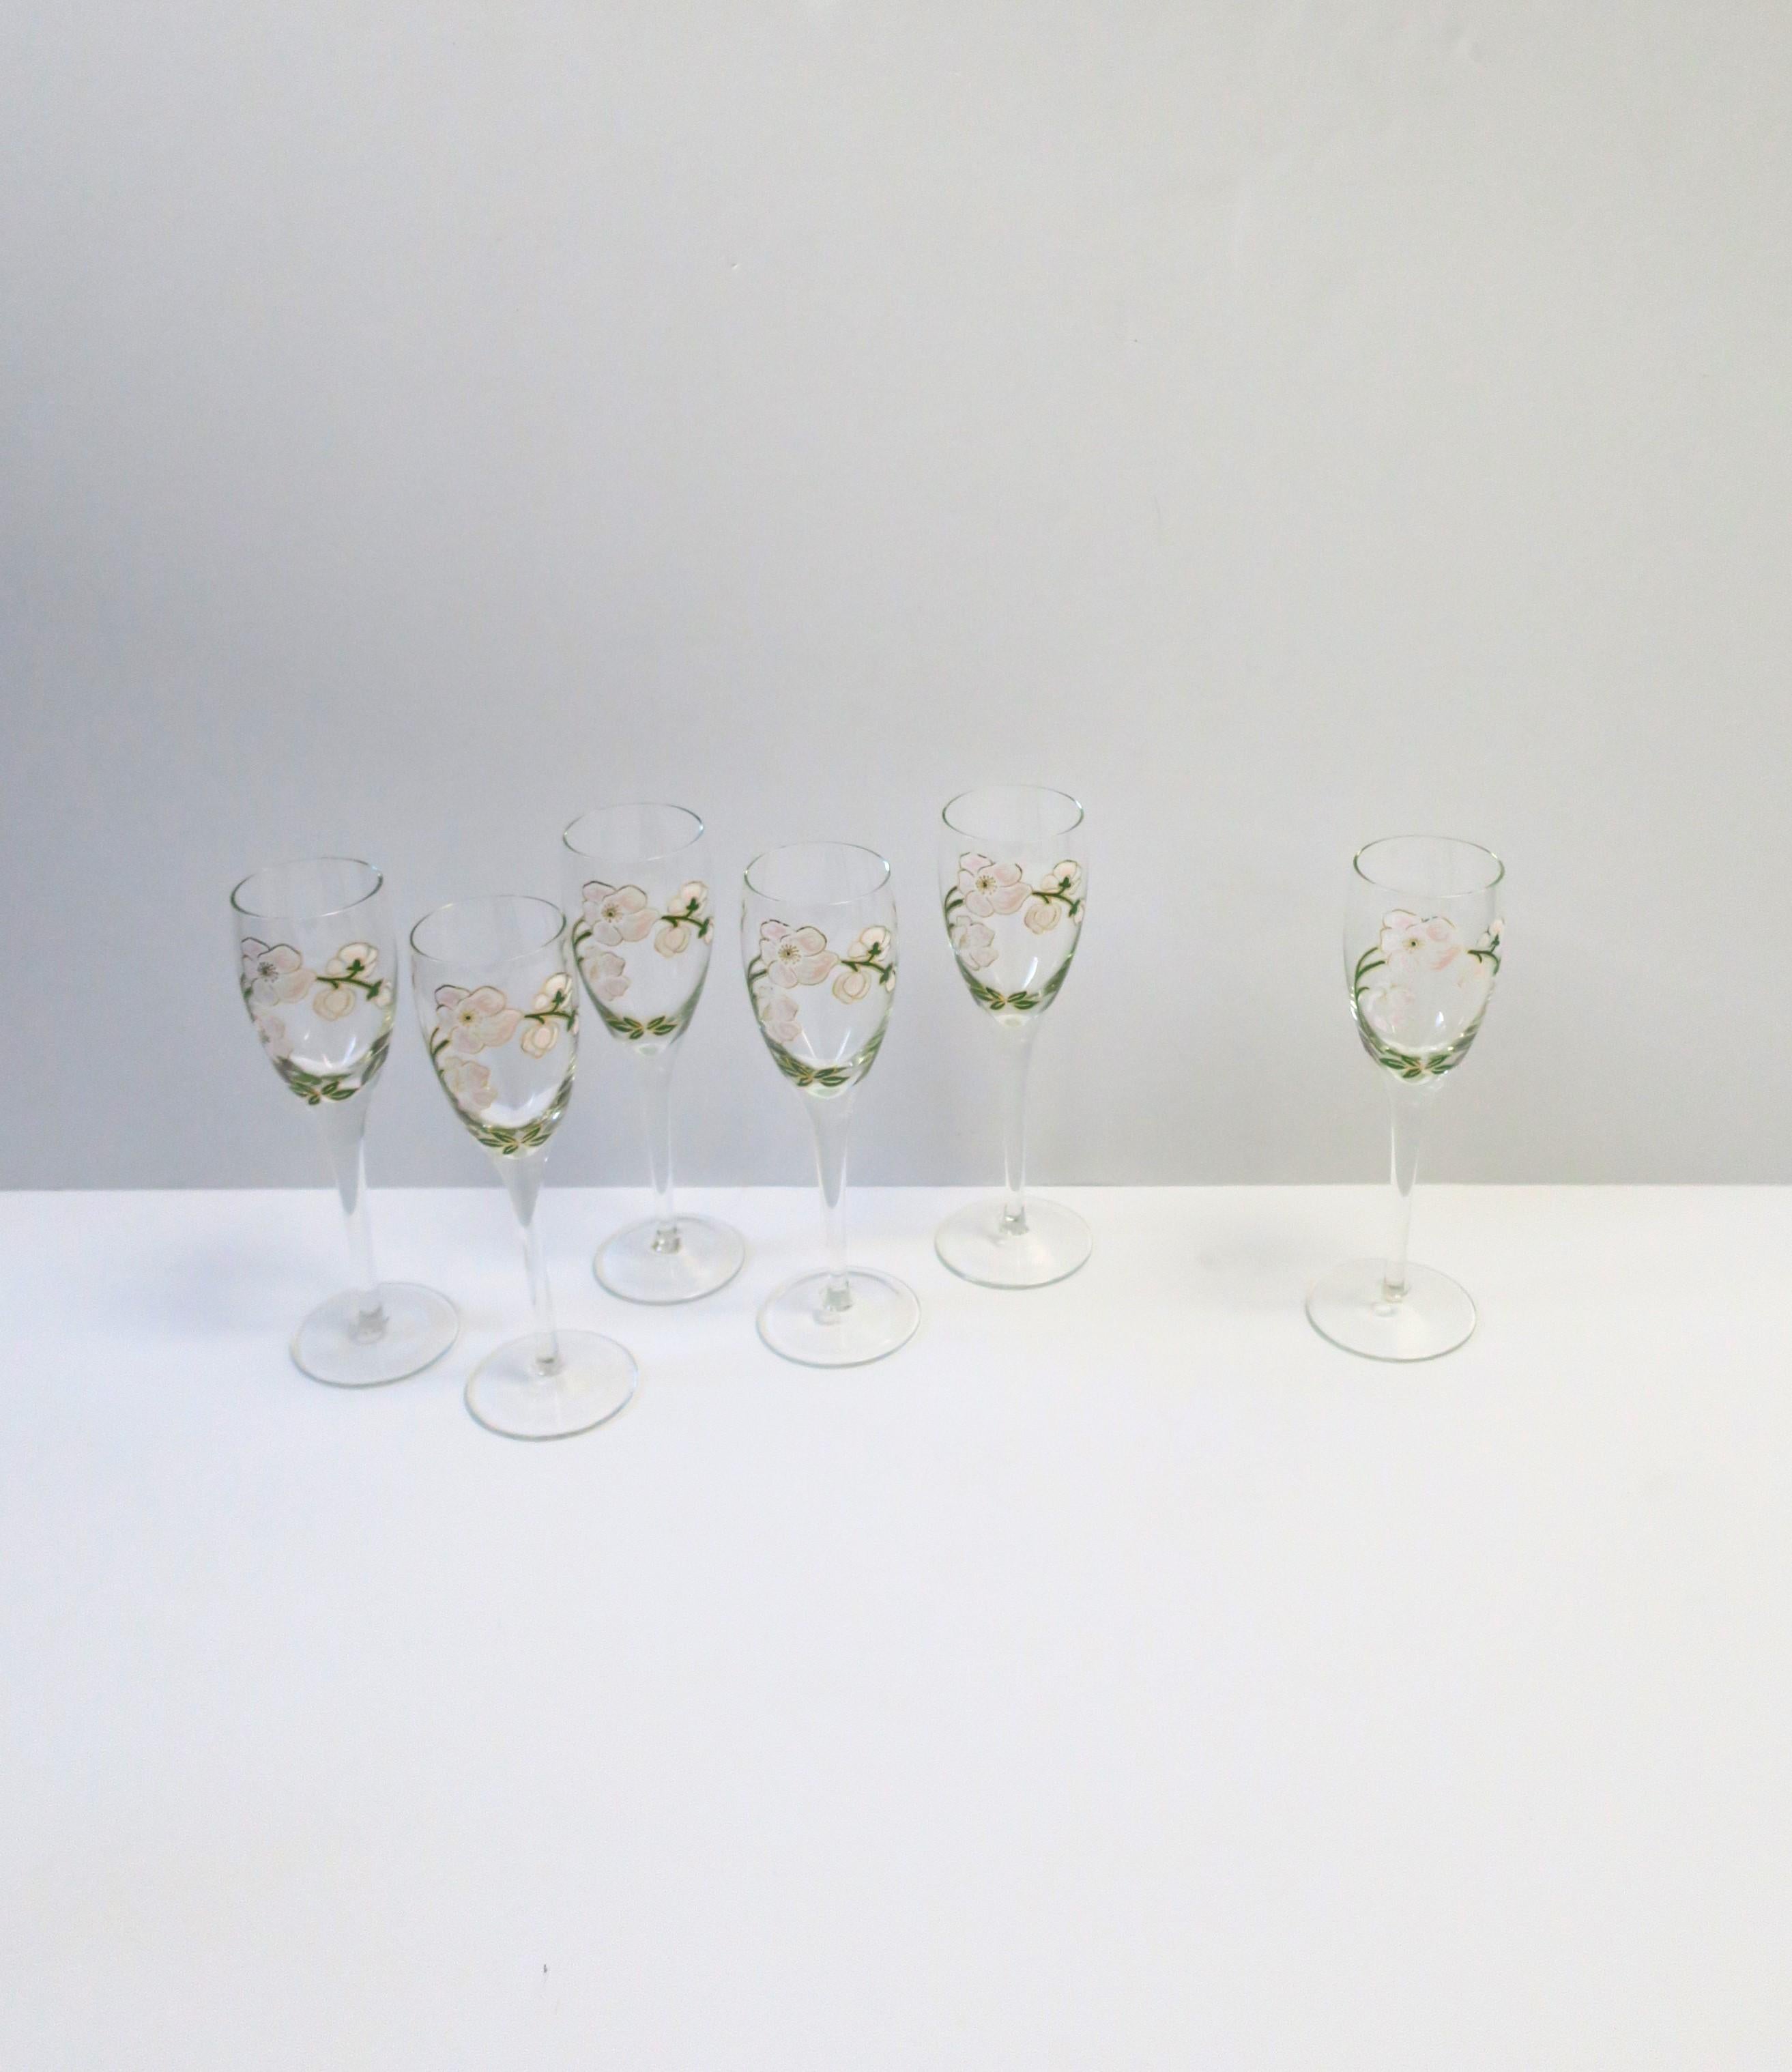 Polychromed French Perrier-Jouet Champagne Flutes Glasses Art Nouveau, Set of 6 For Sale